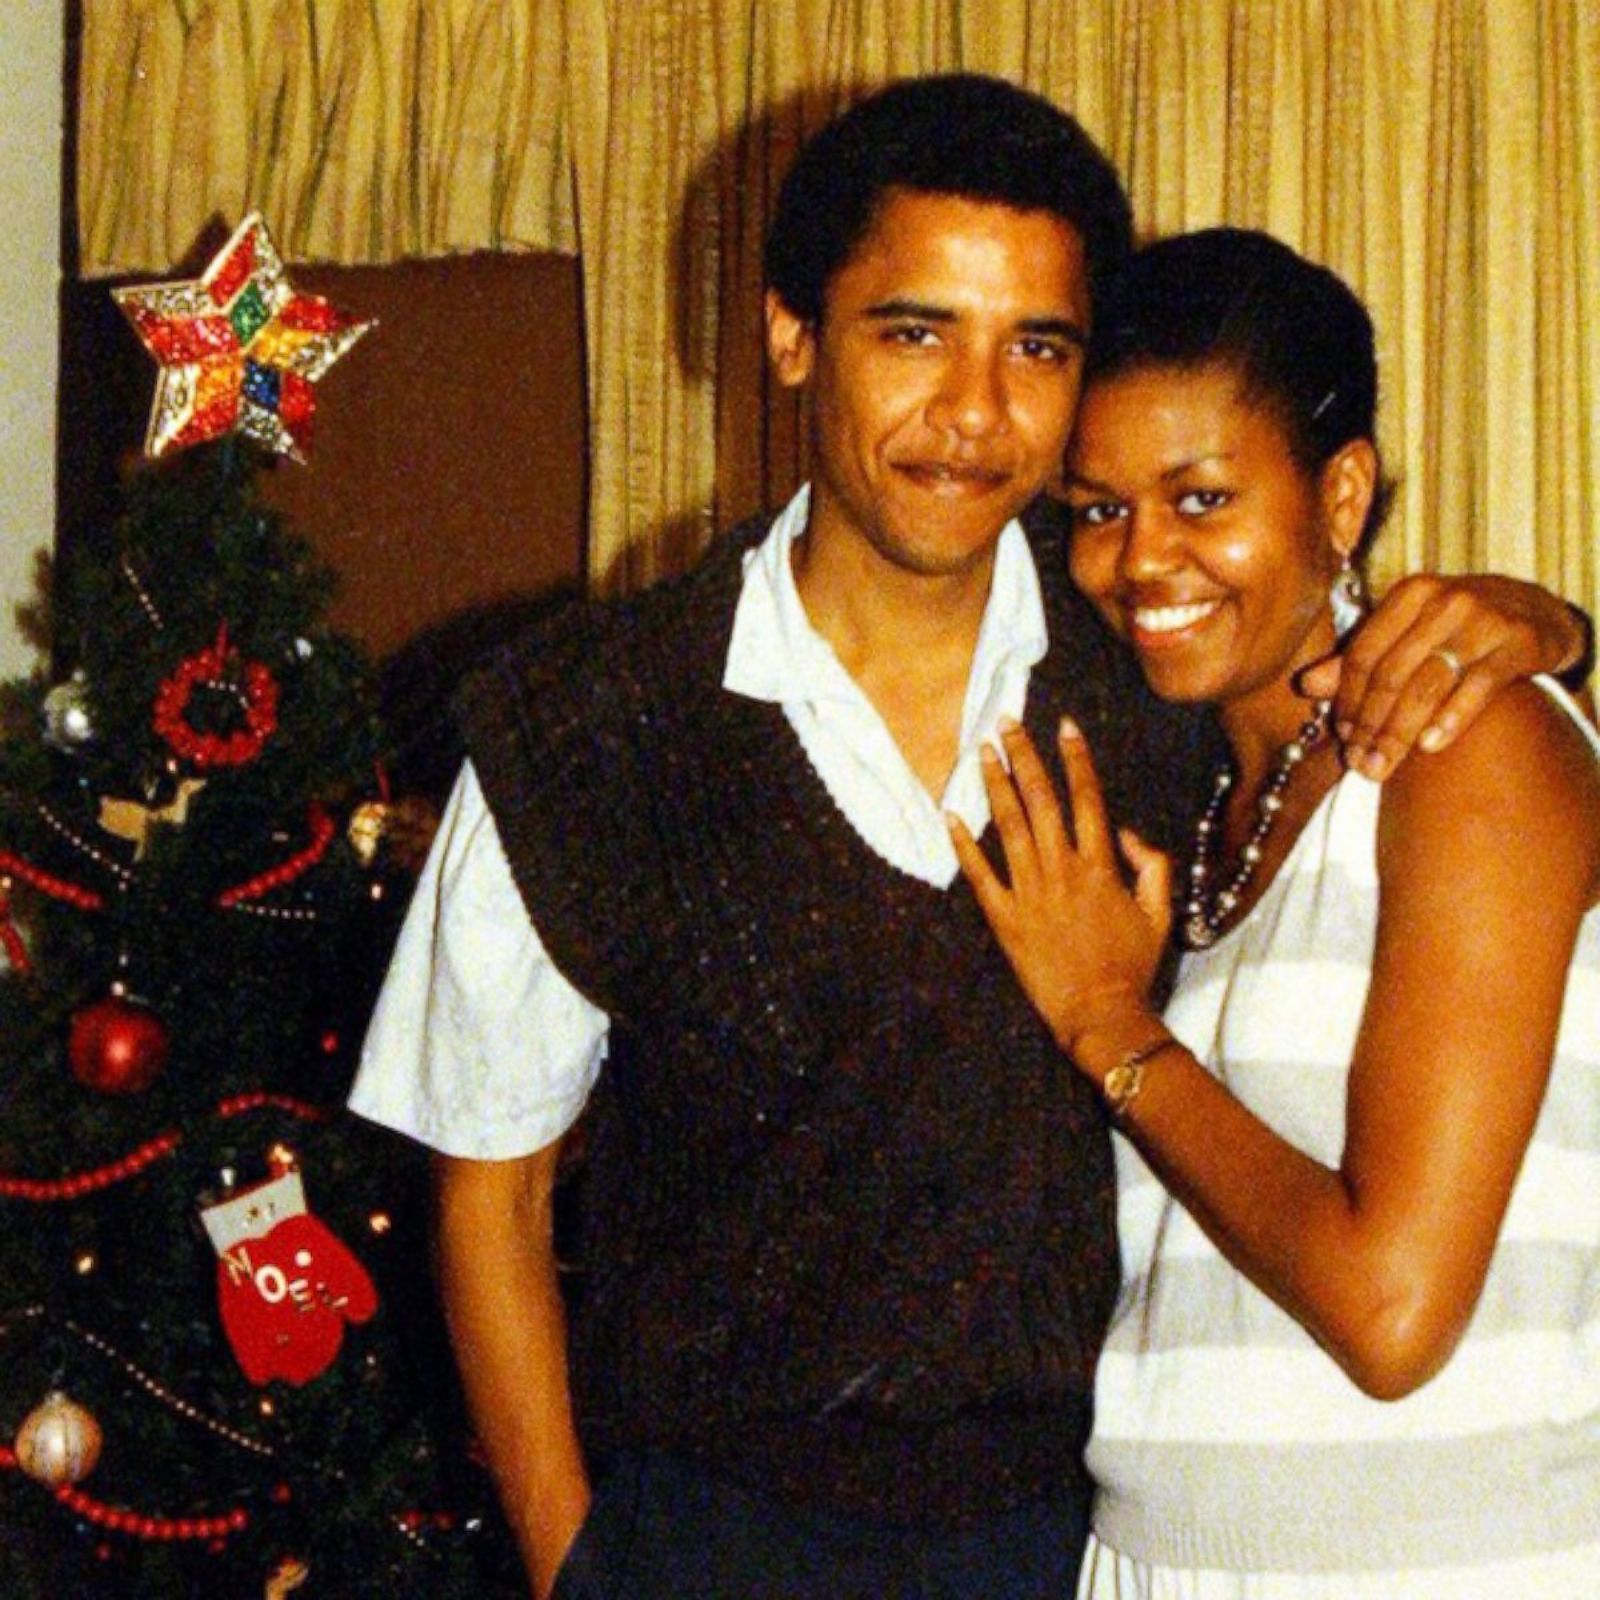 What college did Barack Obama attend?